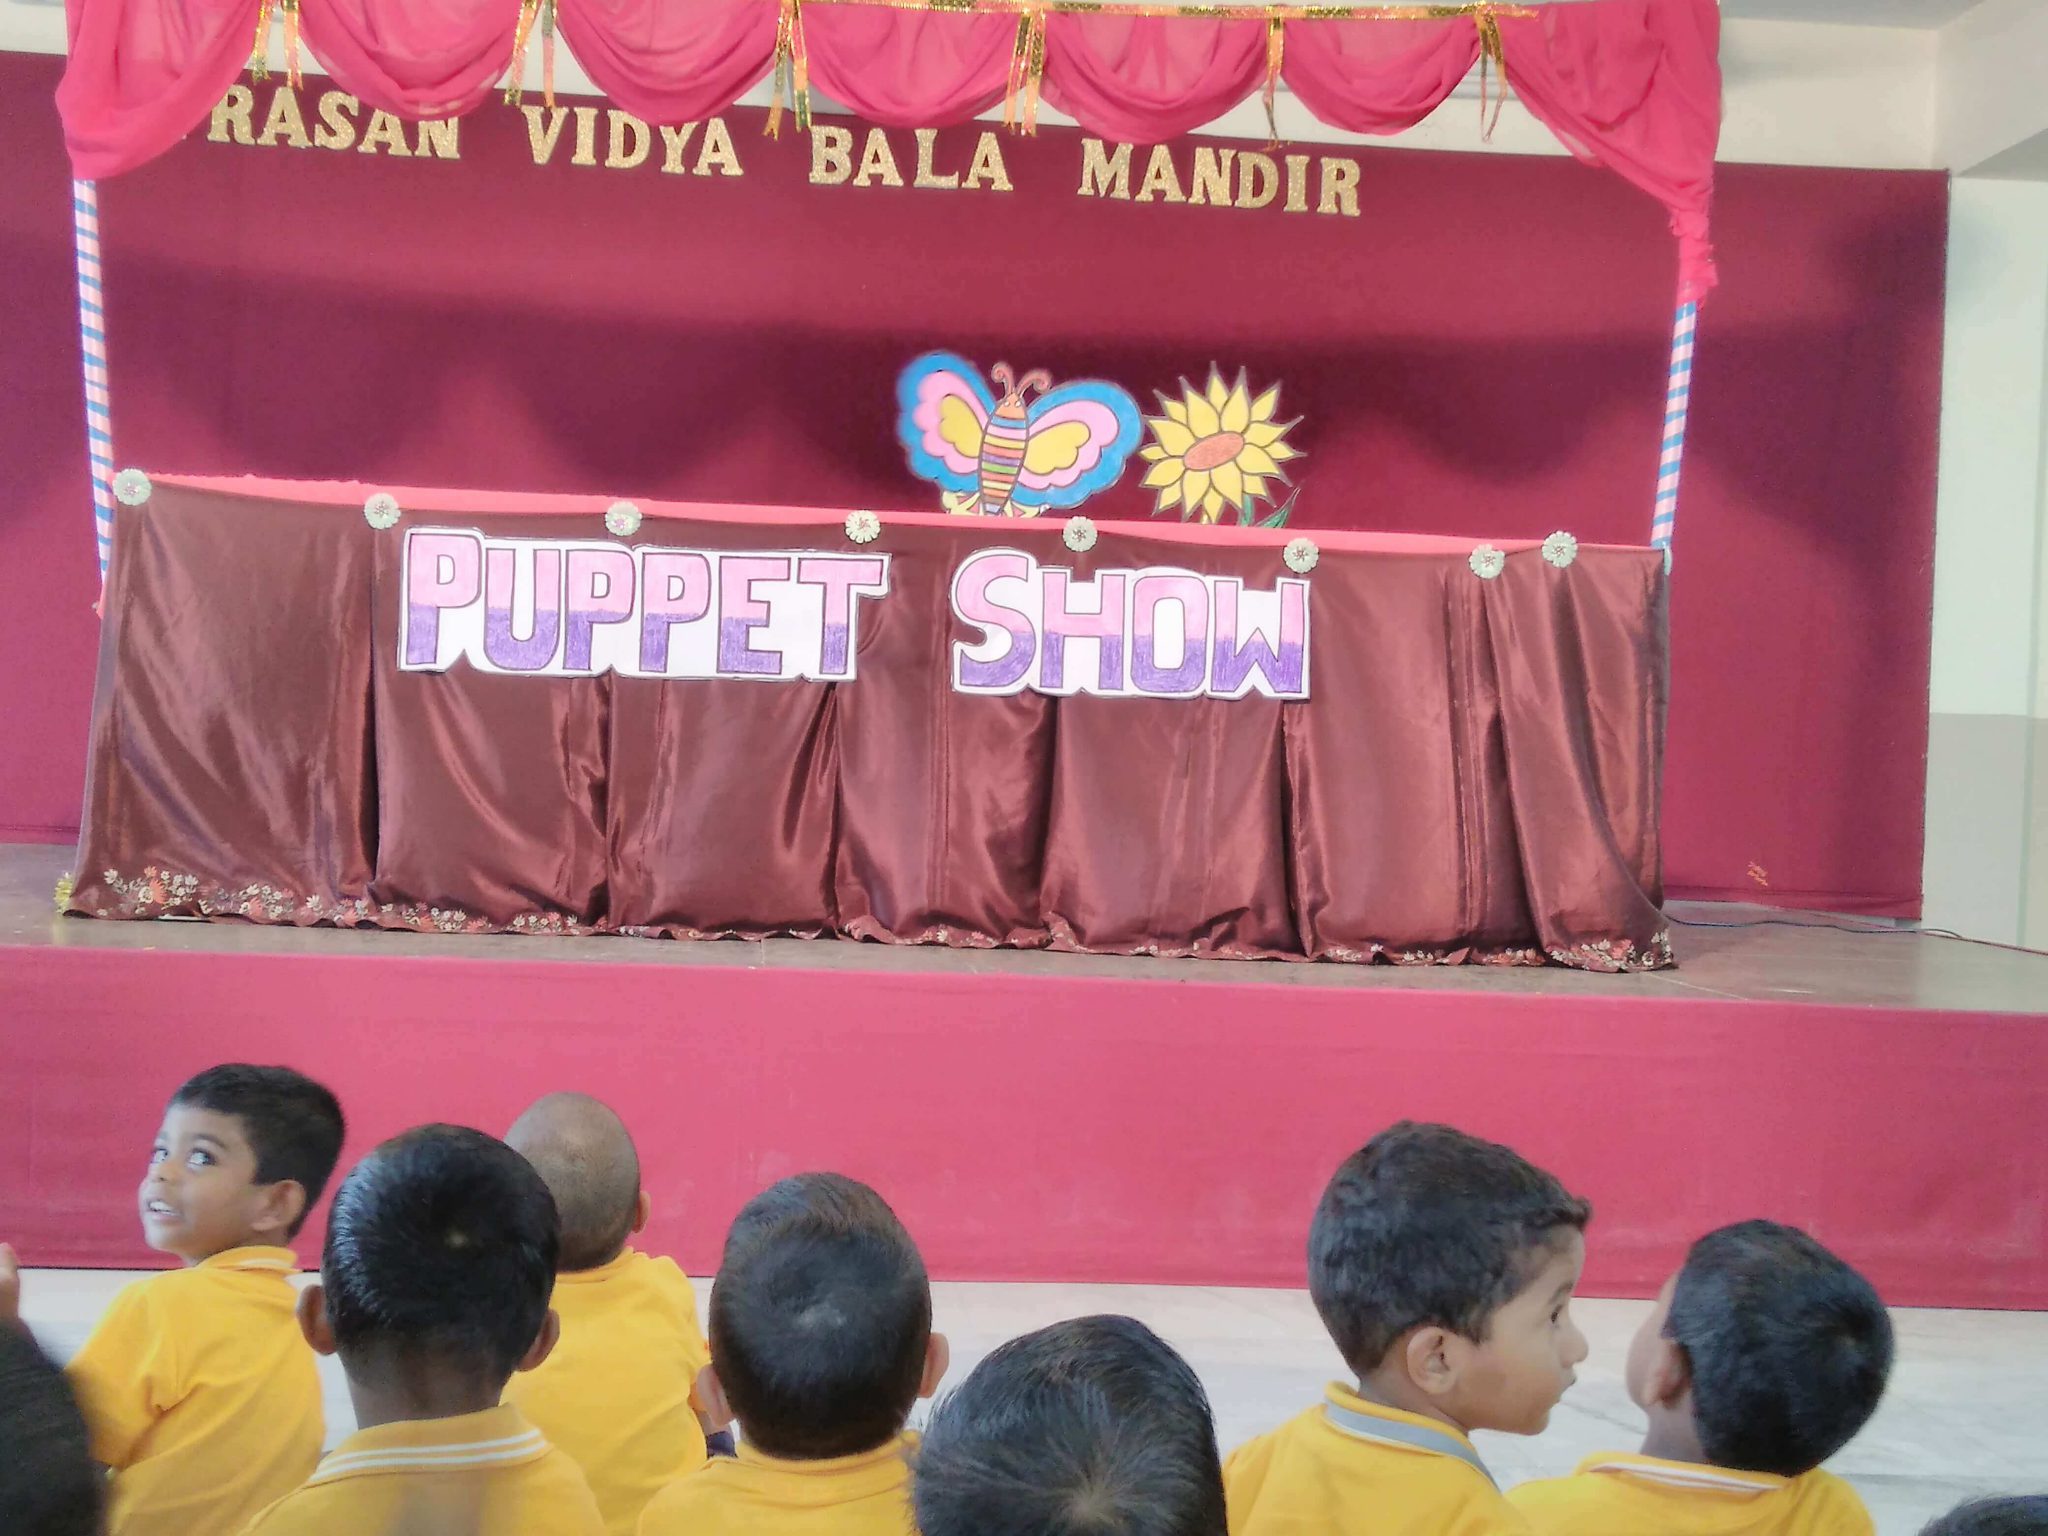 Wow! Its really delightful watching puppet show